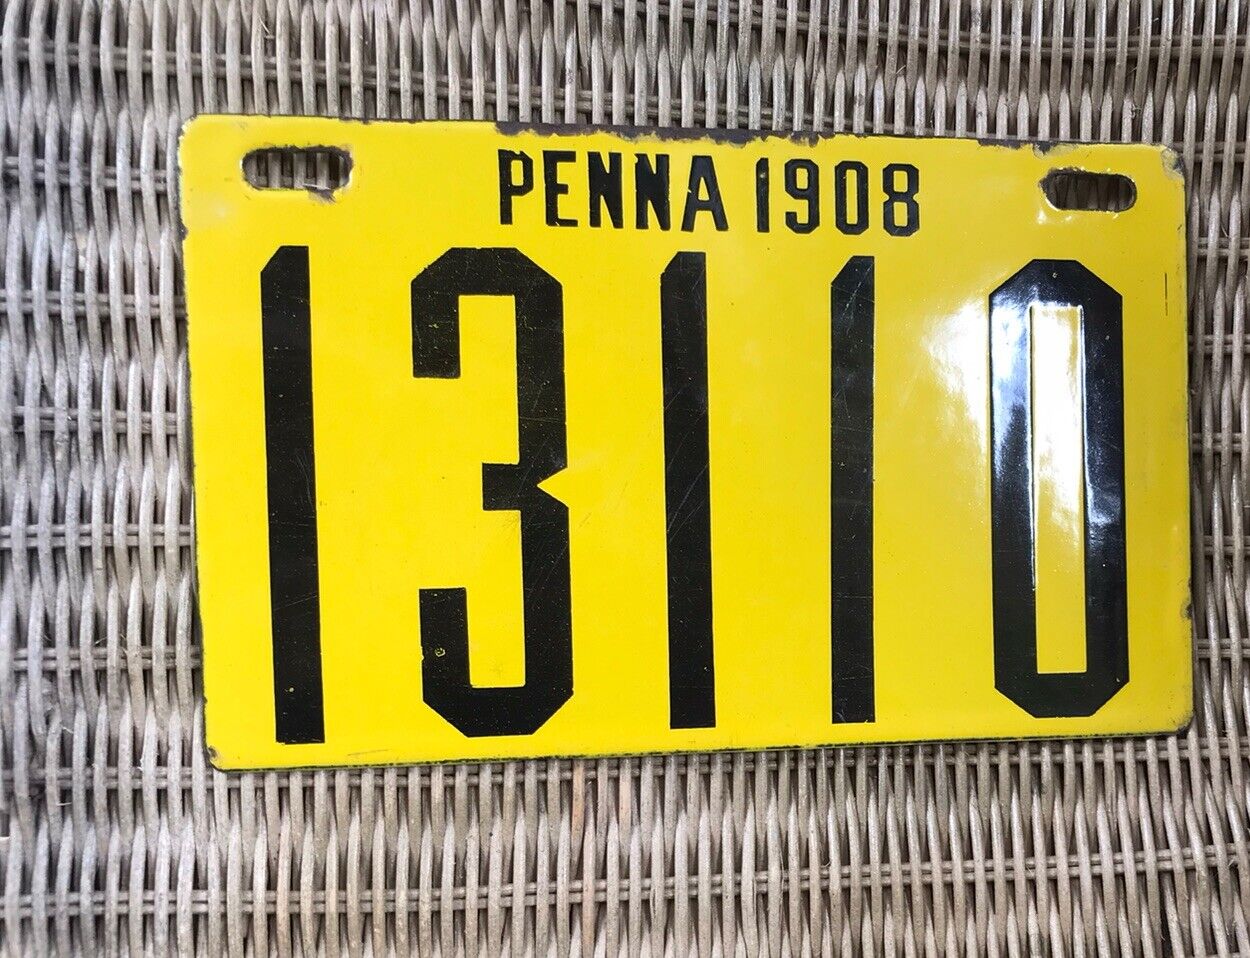 1908 Pennsylvania Porcelain License Plate - GLOSSY - STAMPED ING - RICH